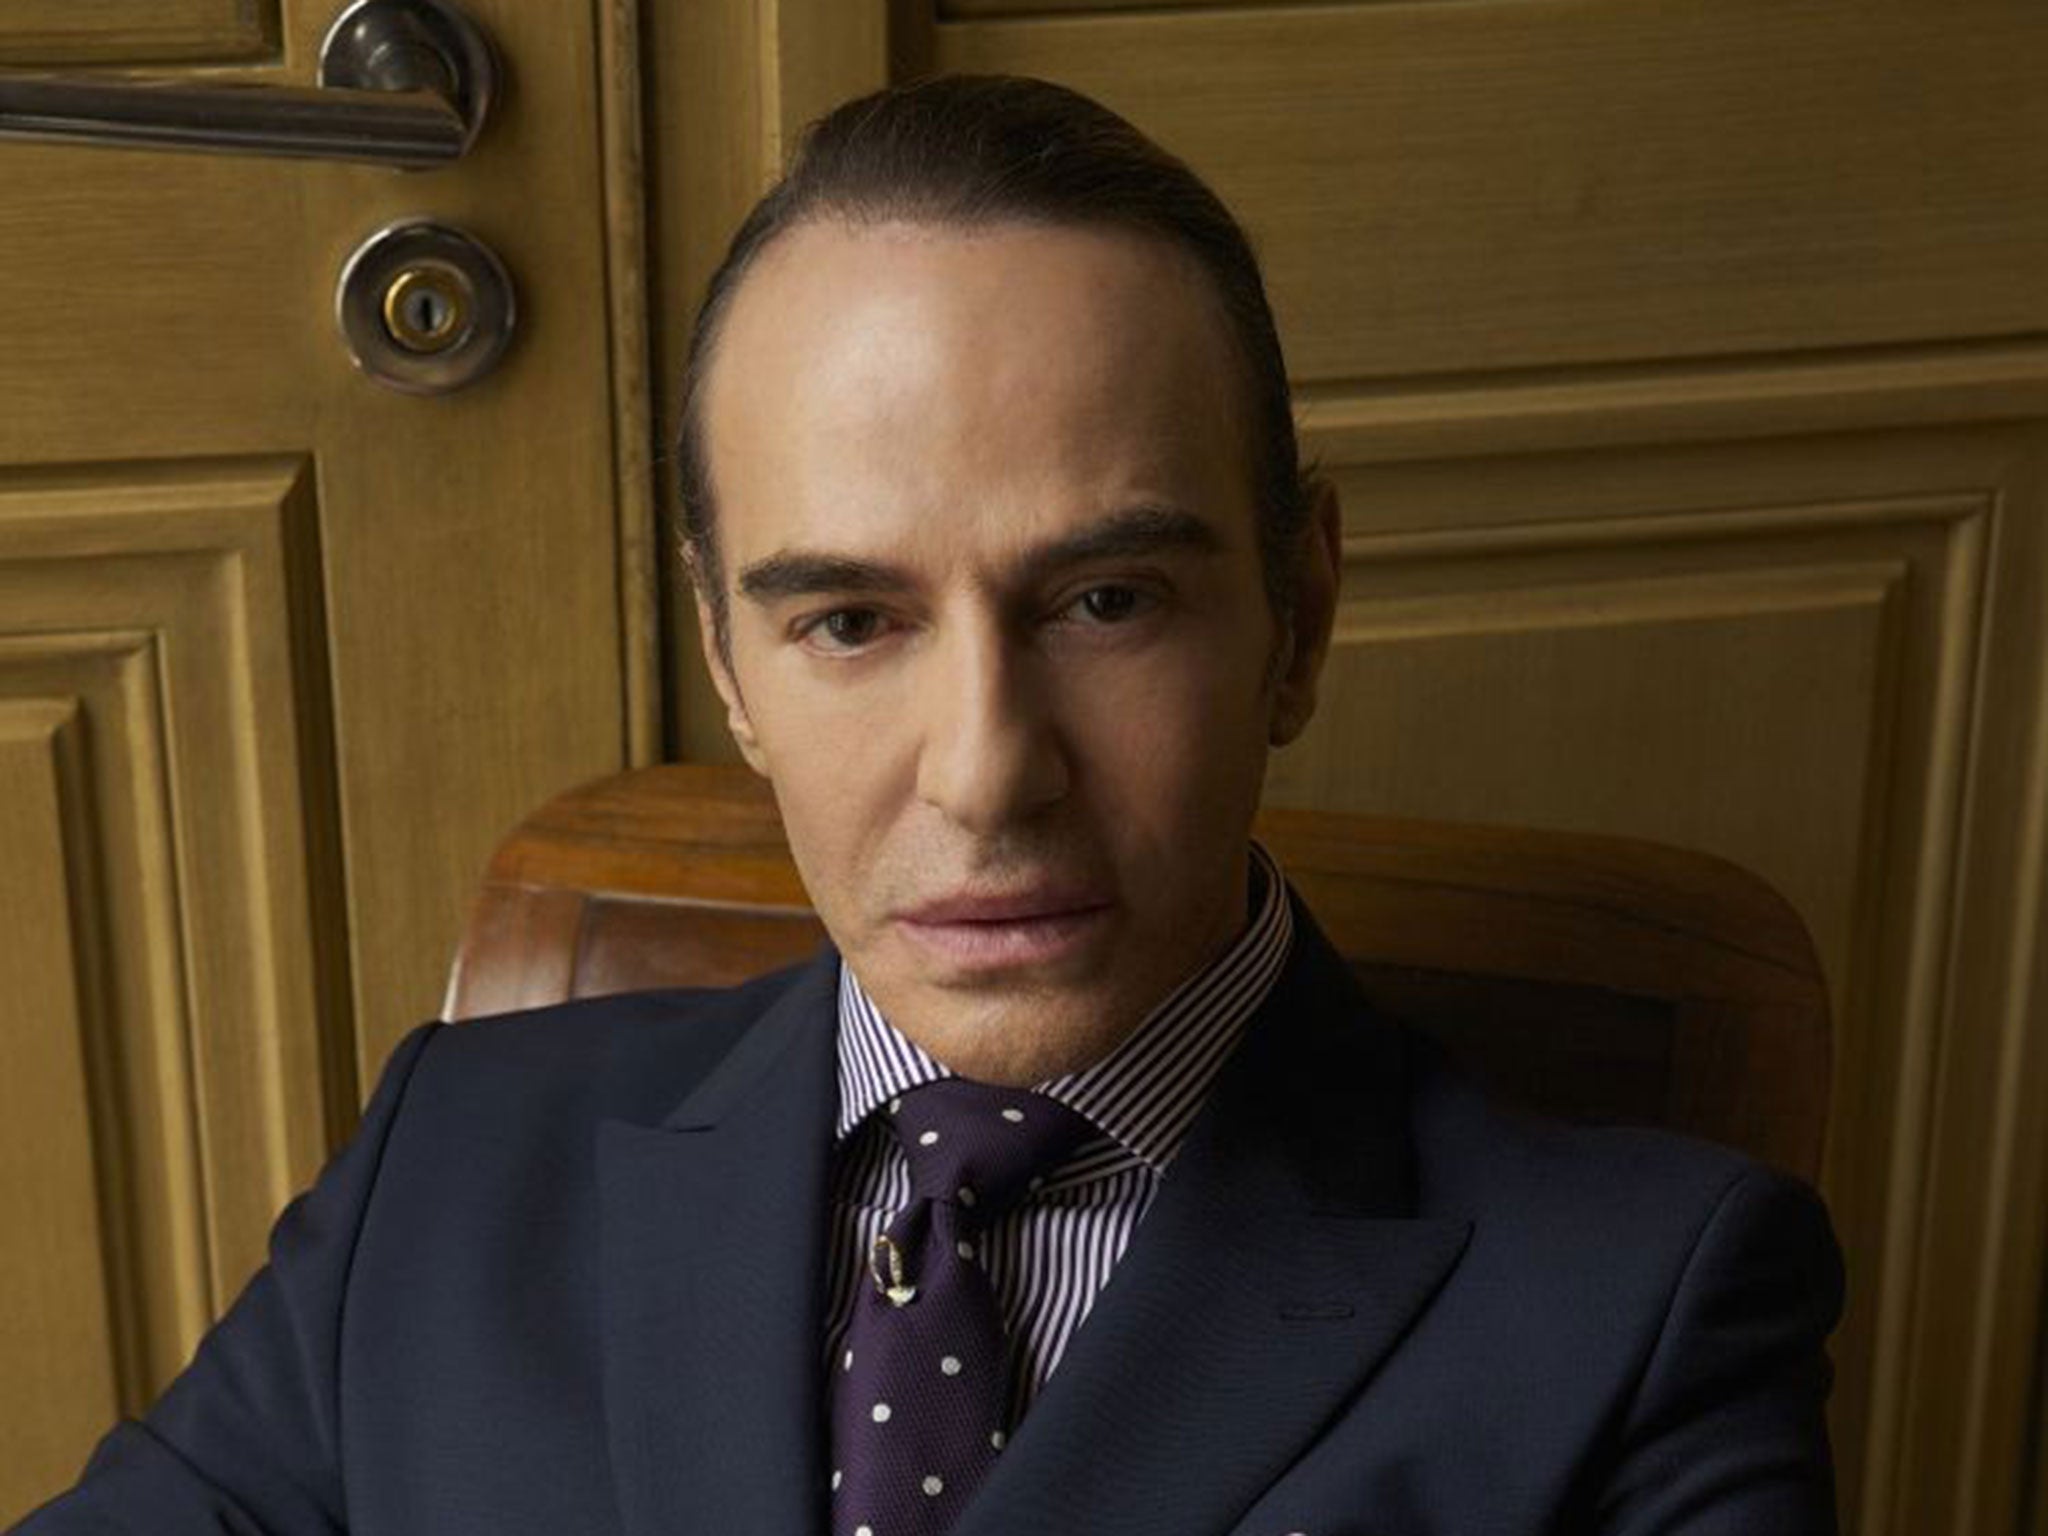 John Galliano will present his first menswear collection for